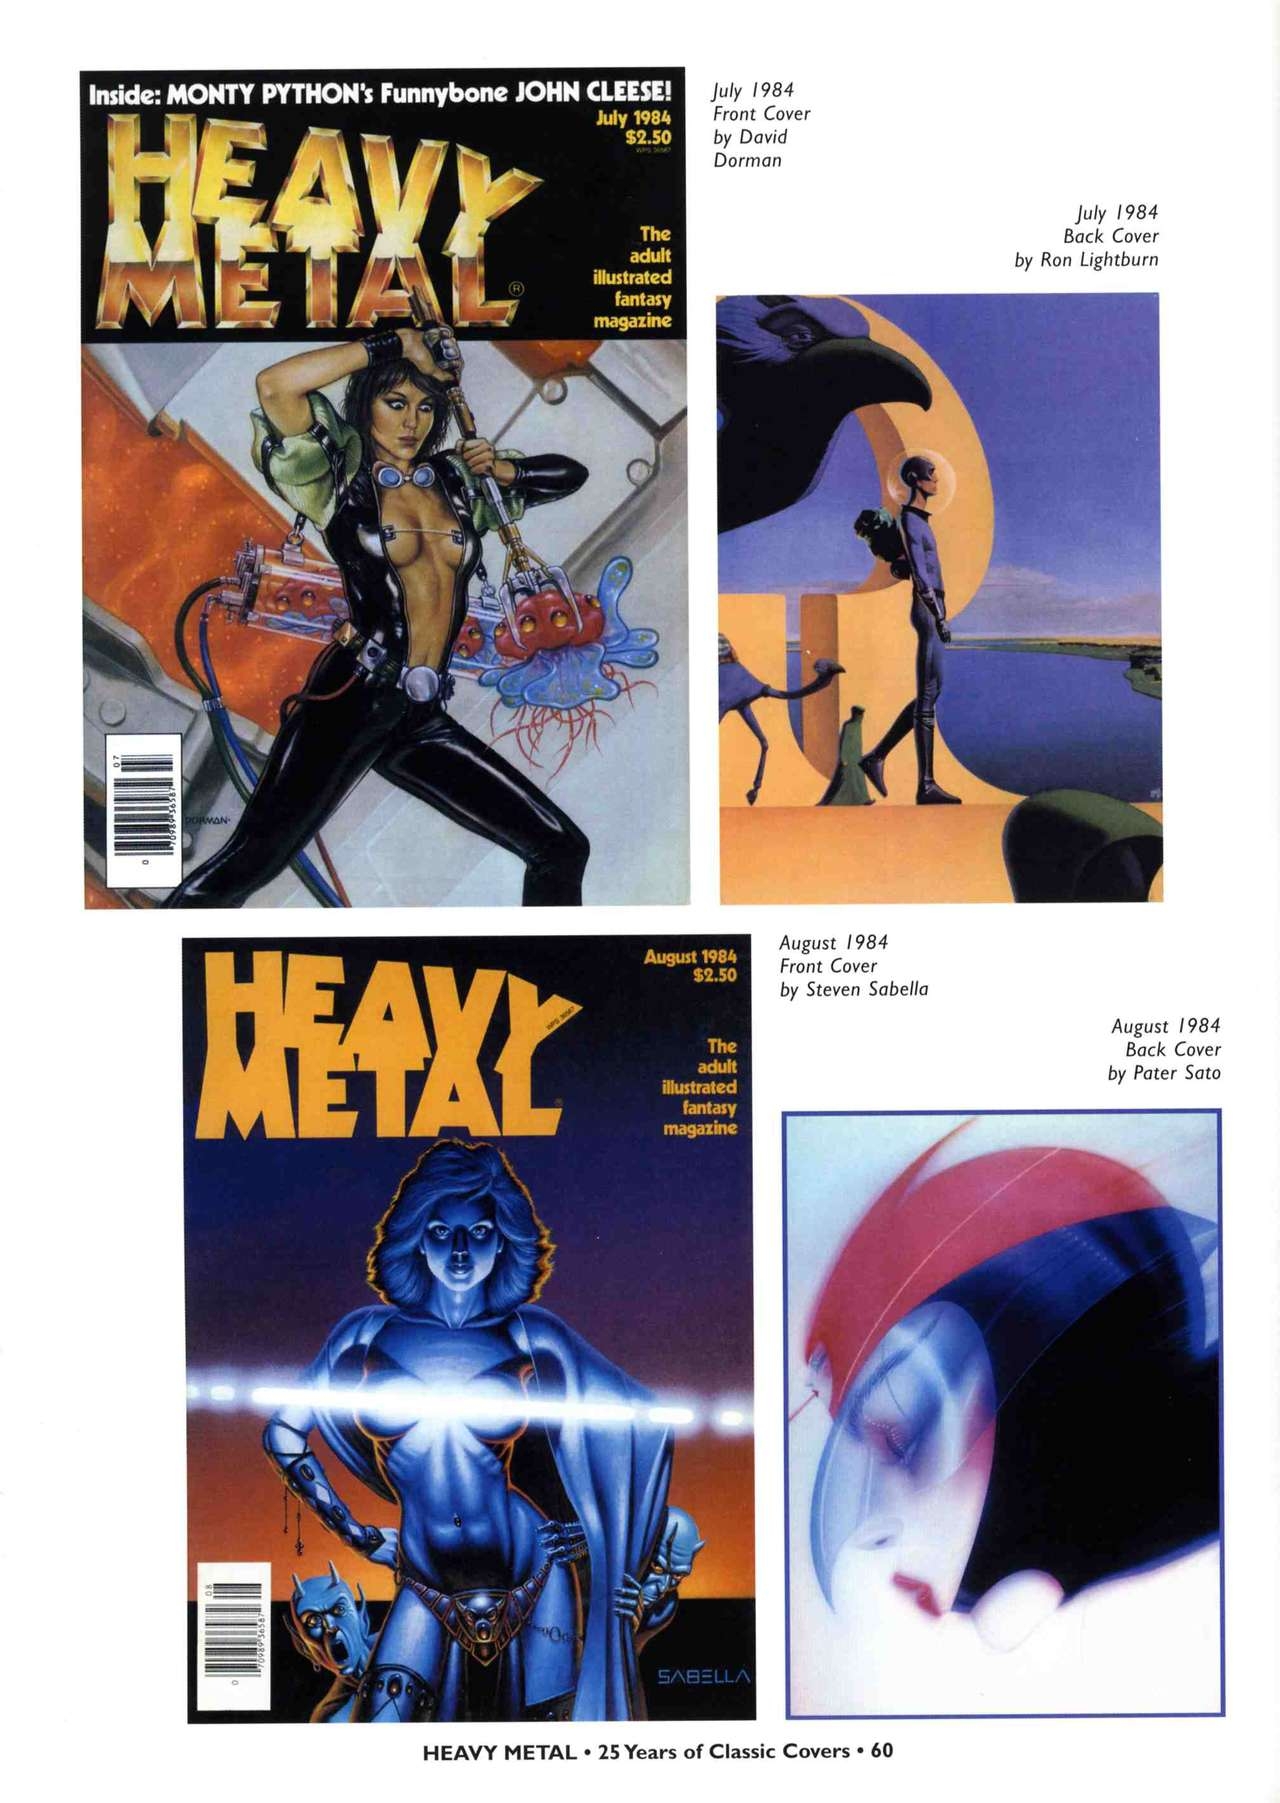 HEAVY METAL 25 Years of Classic Covers 65